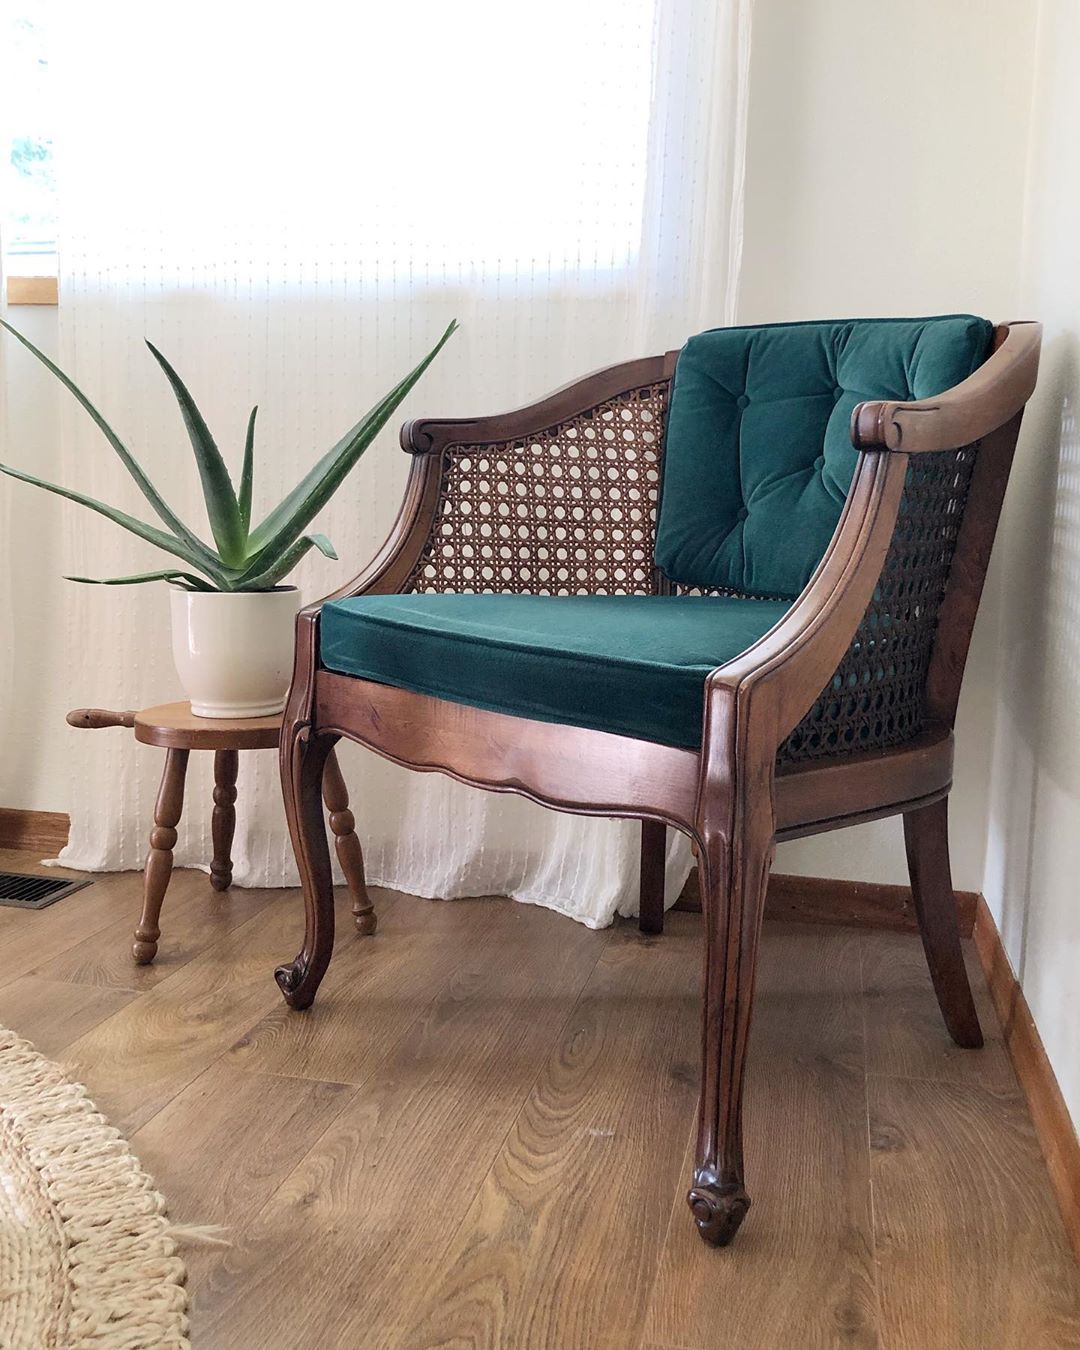 Green and brown vintage chair in the corner of a room. Photo by Instagram user @shoppe_eclectic